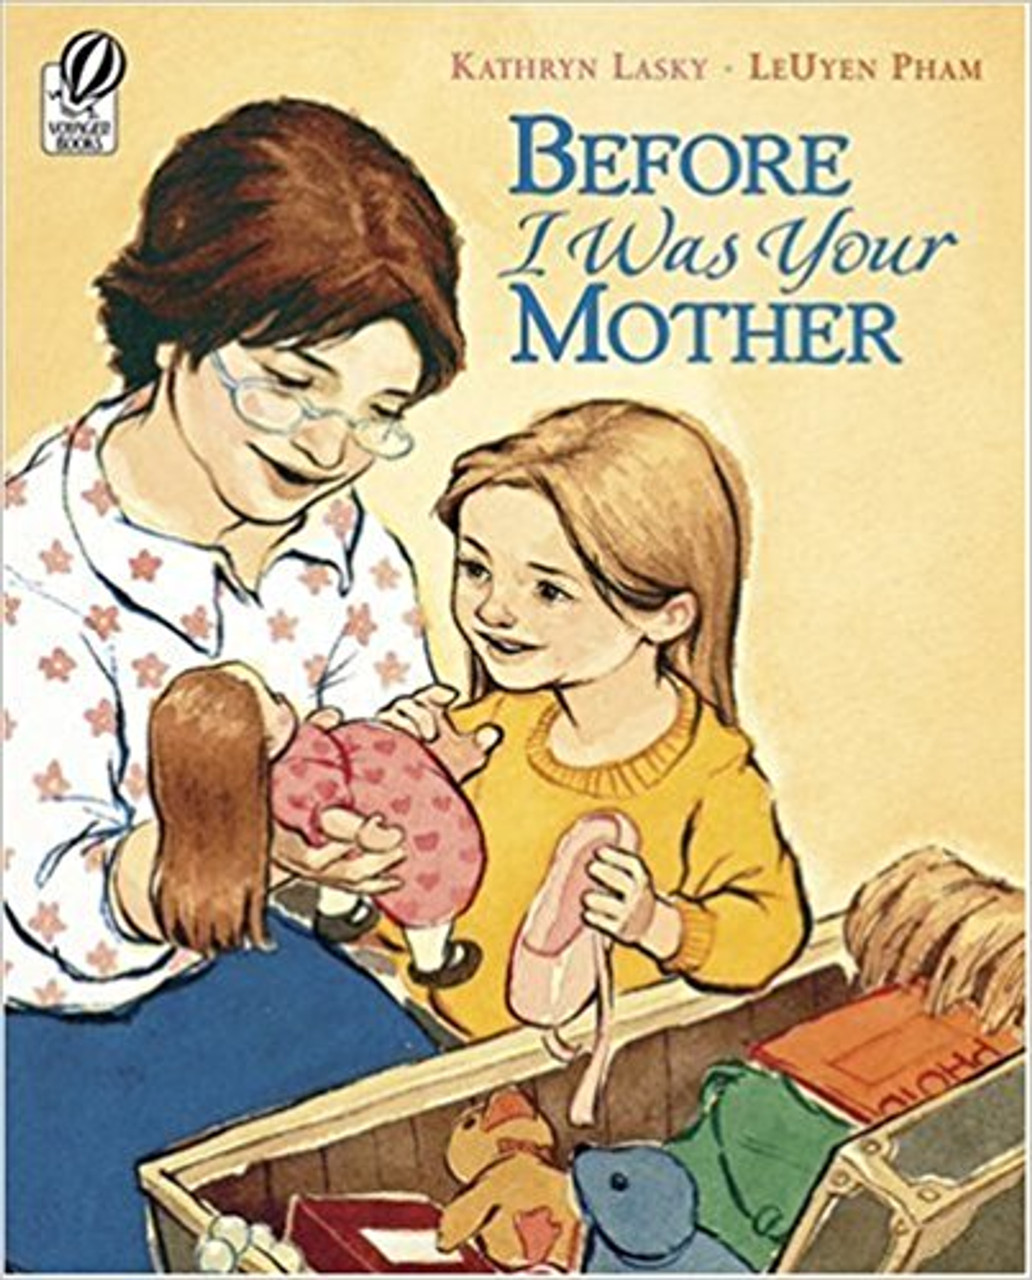 Before I Was Your Mother by Kathryn Lasky